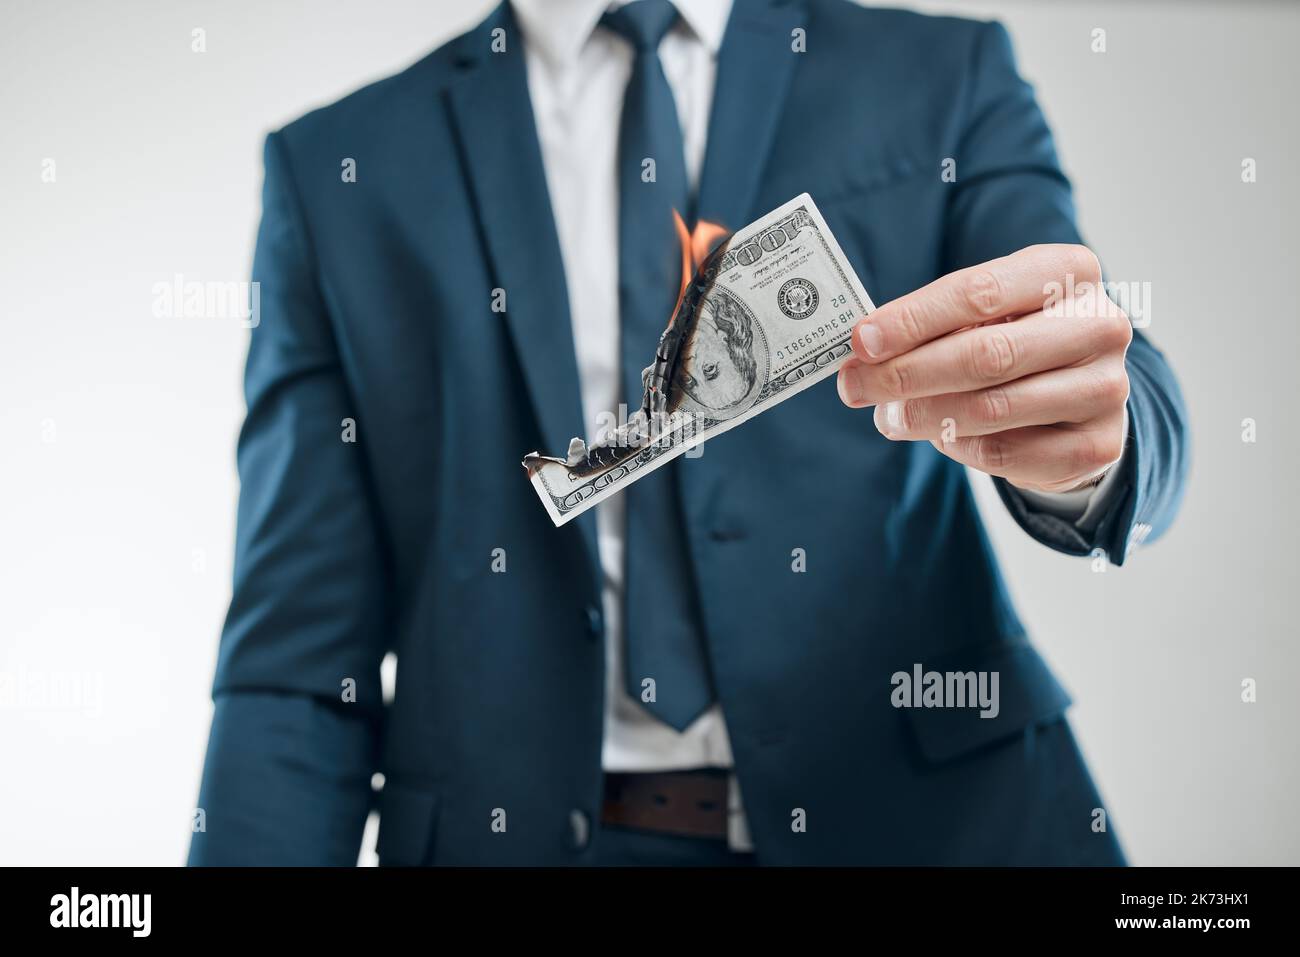 Life is a game, money is how we keep score. Studio shot of an unrecognisable businessman burning a banknote against a white background. Stock Photo